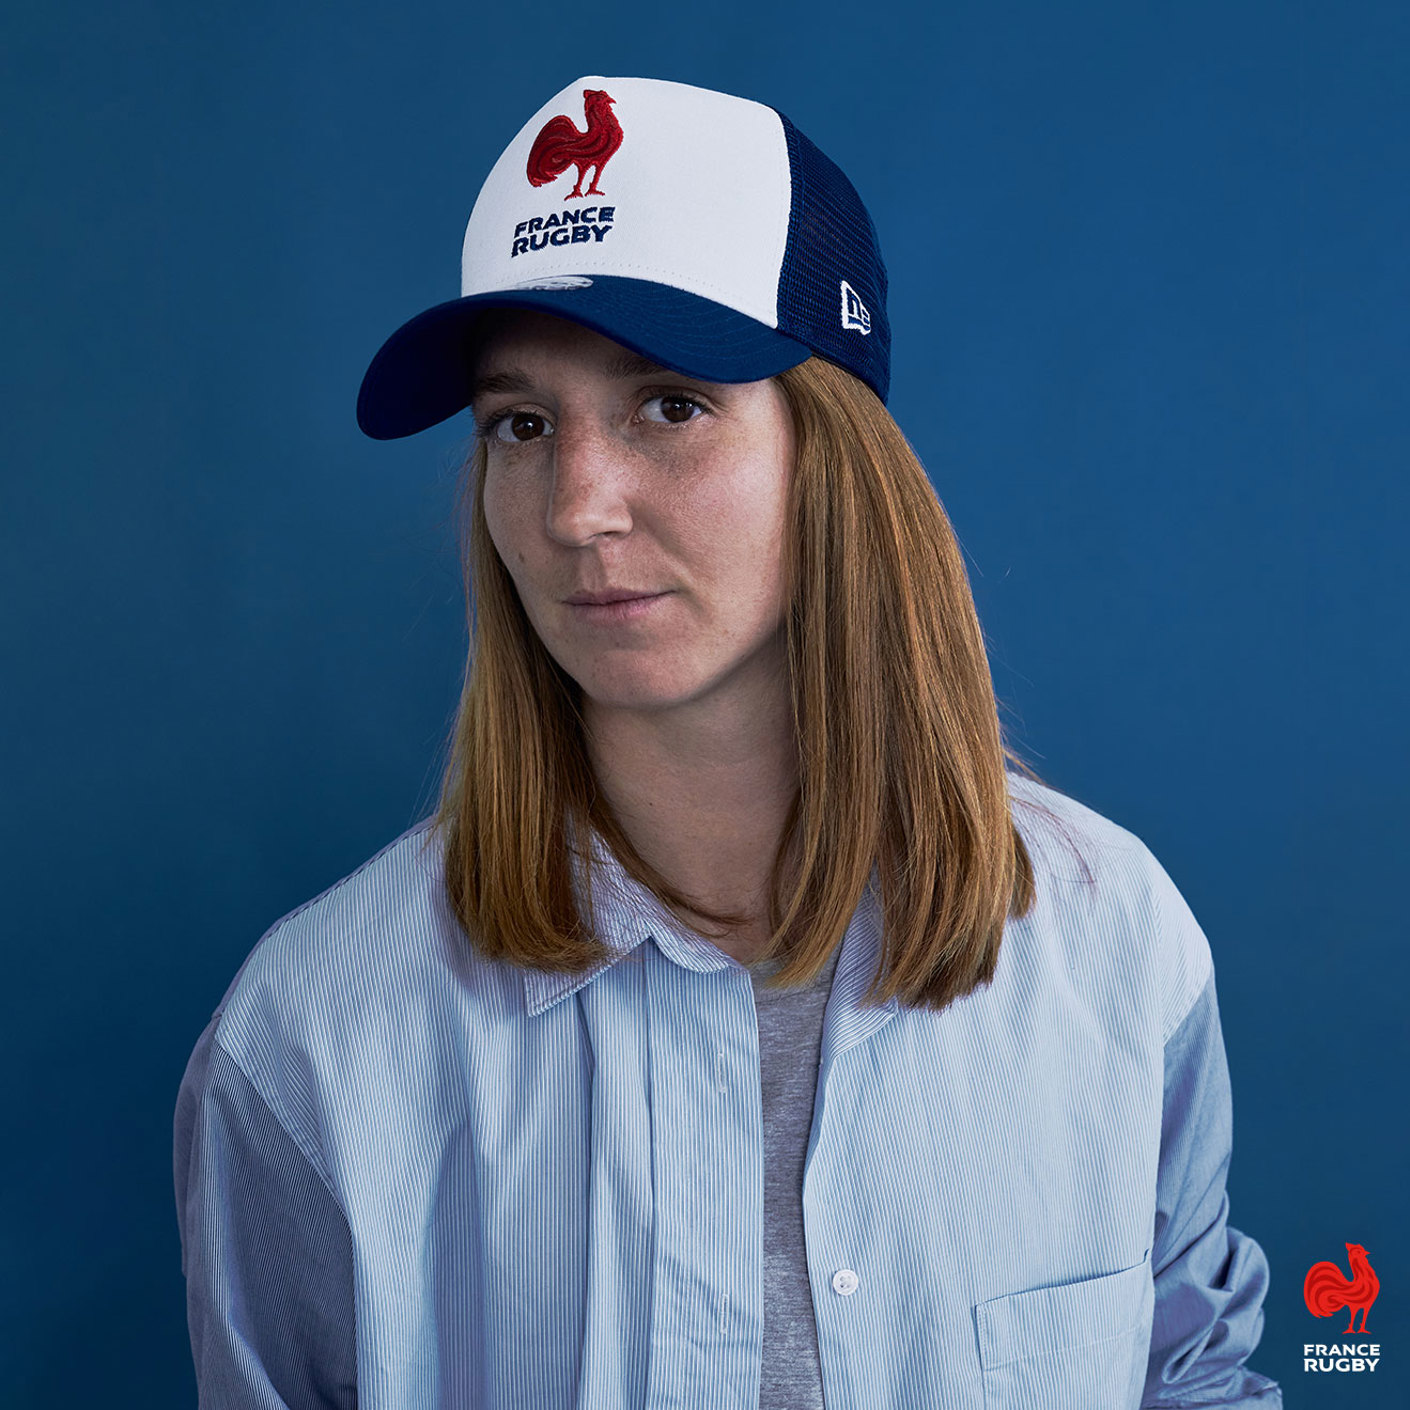 New Era Cap - France Rugby Headwear Collection.